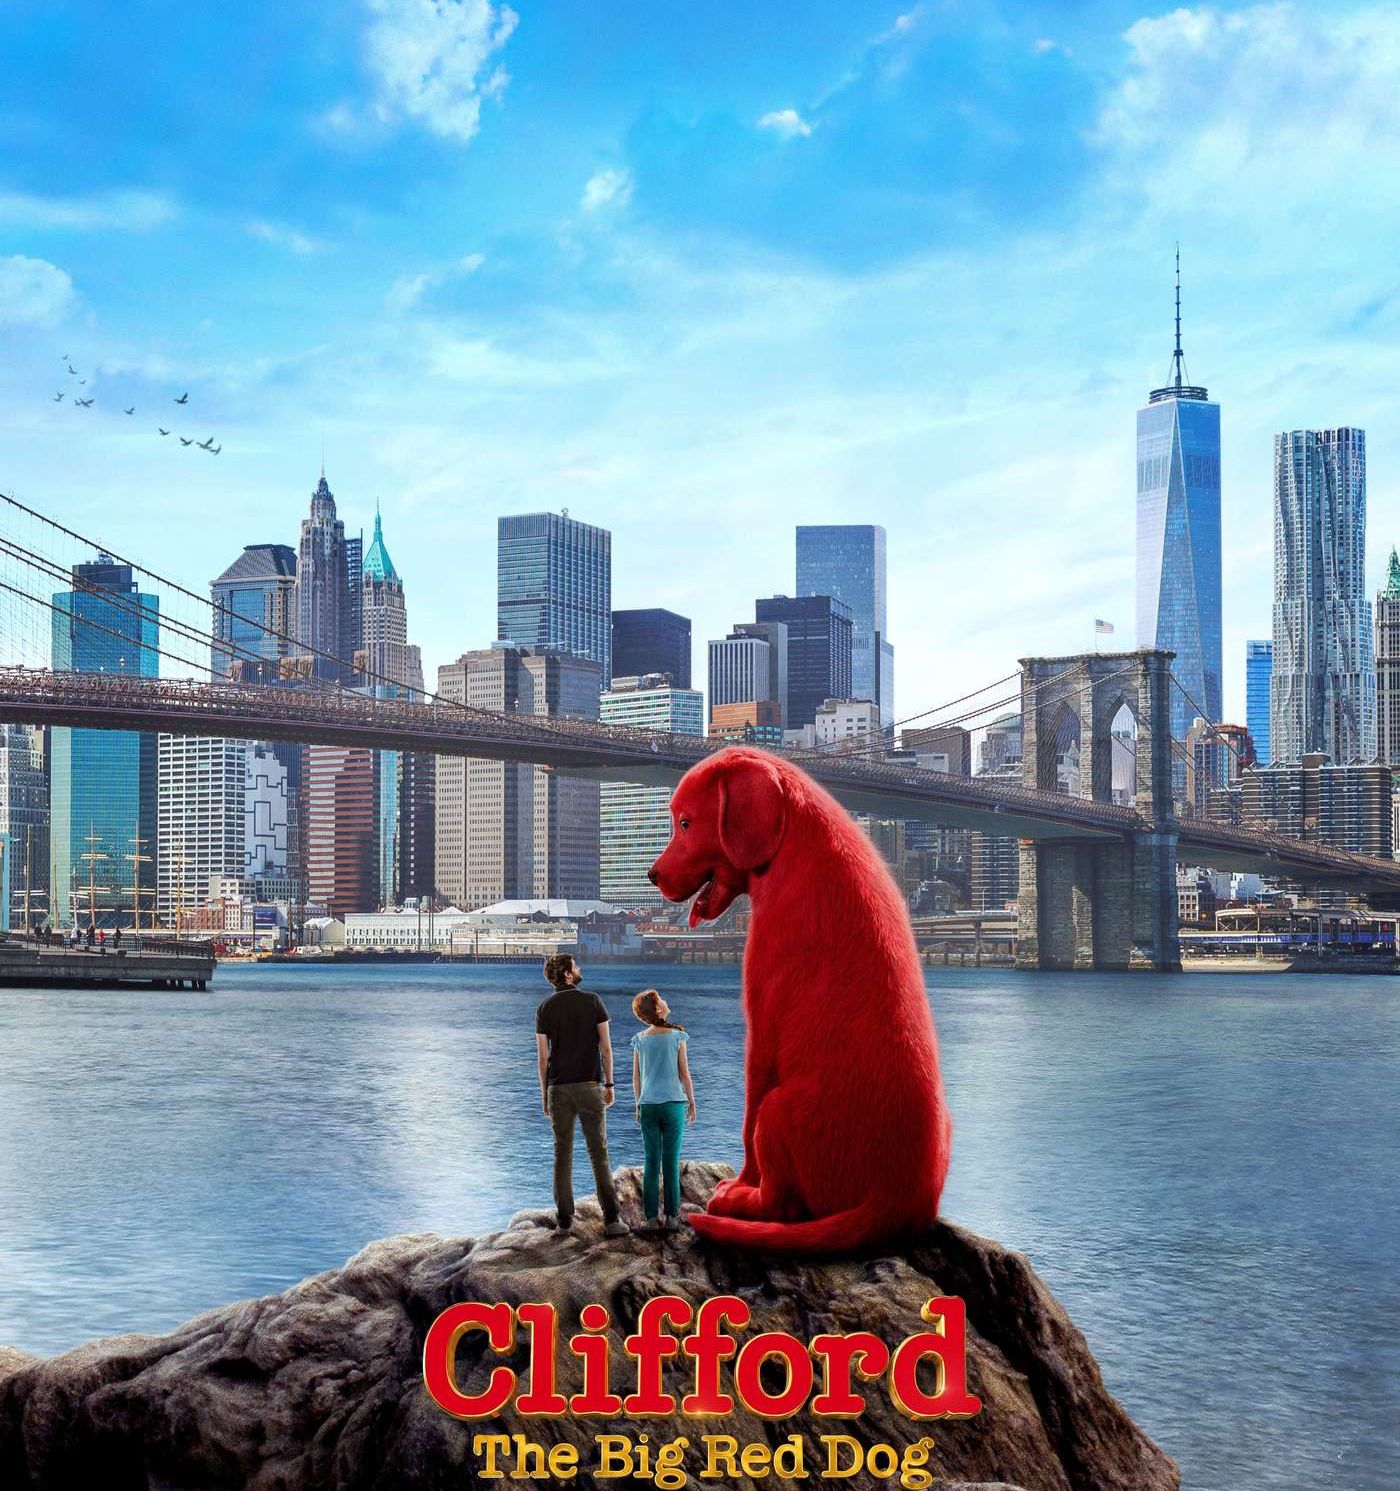 Where to watch Clifford the Big Red Dog